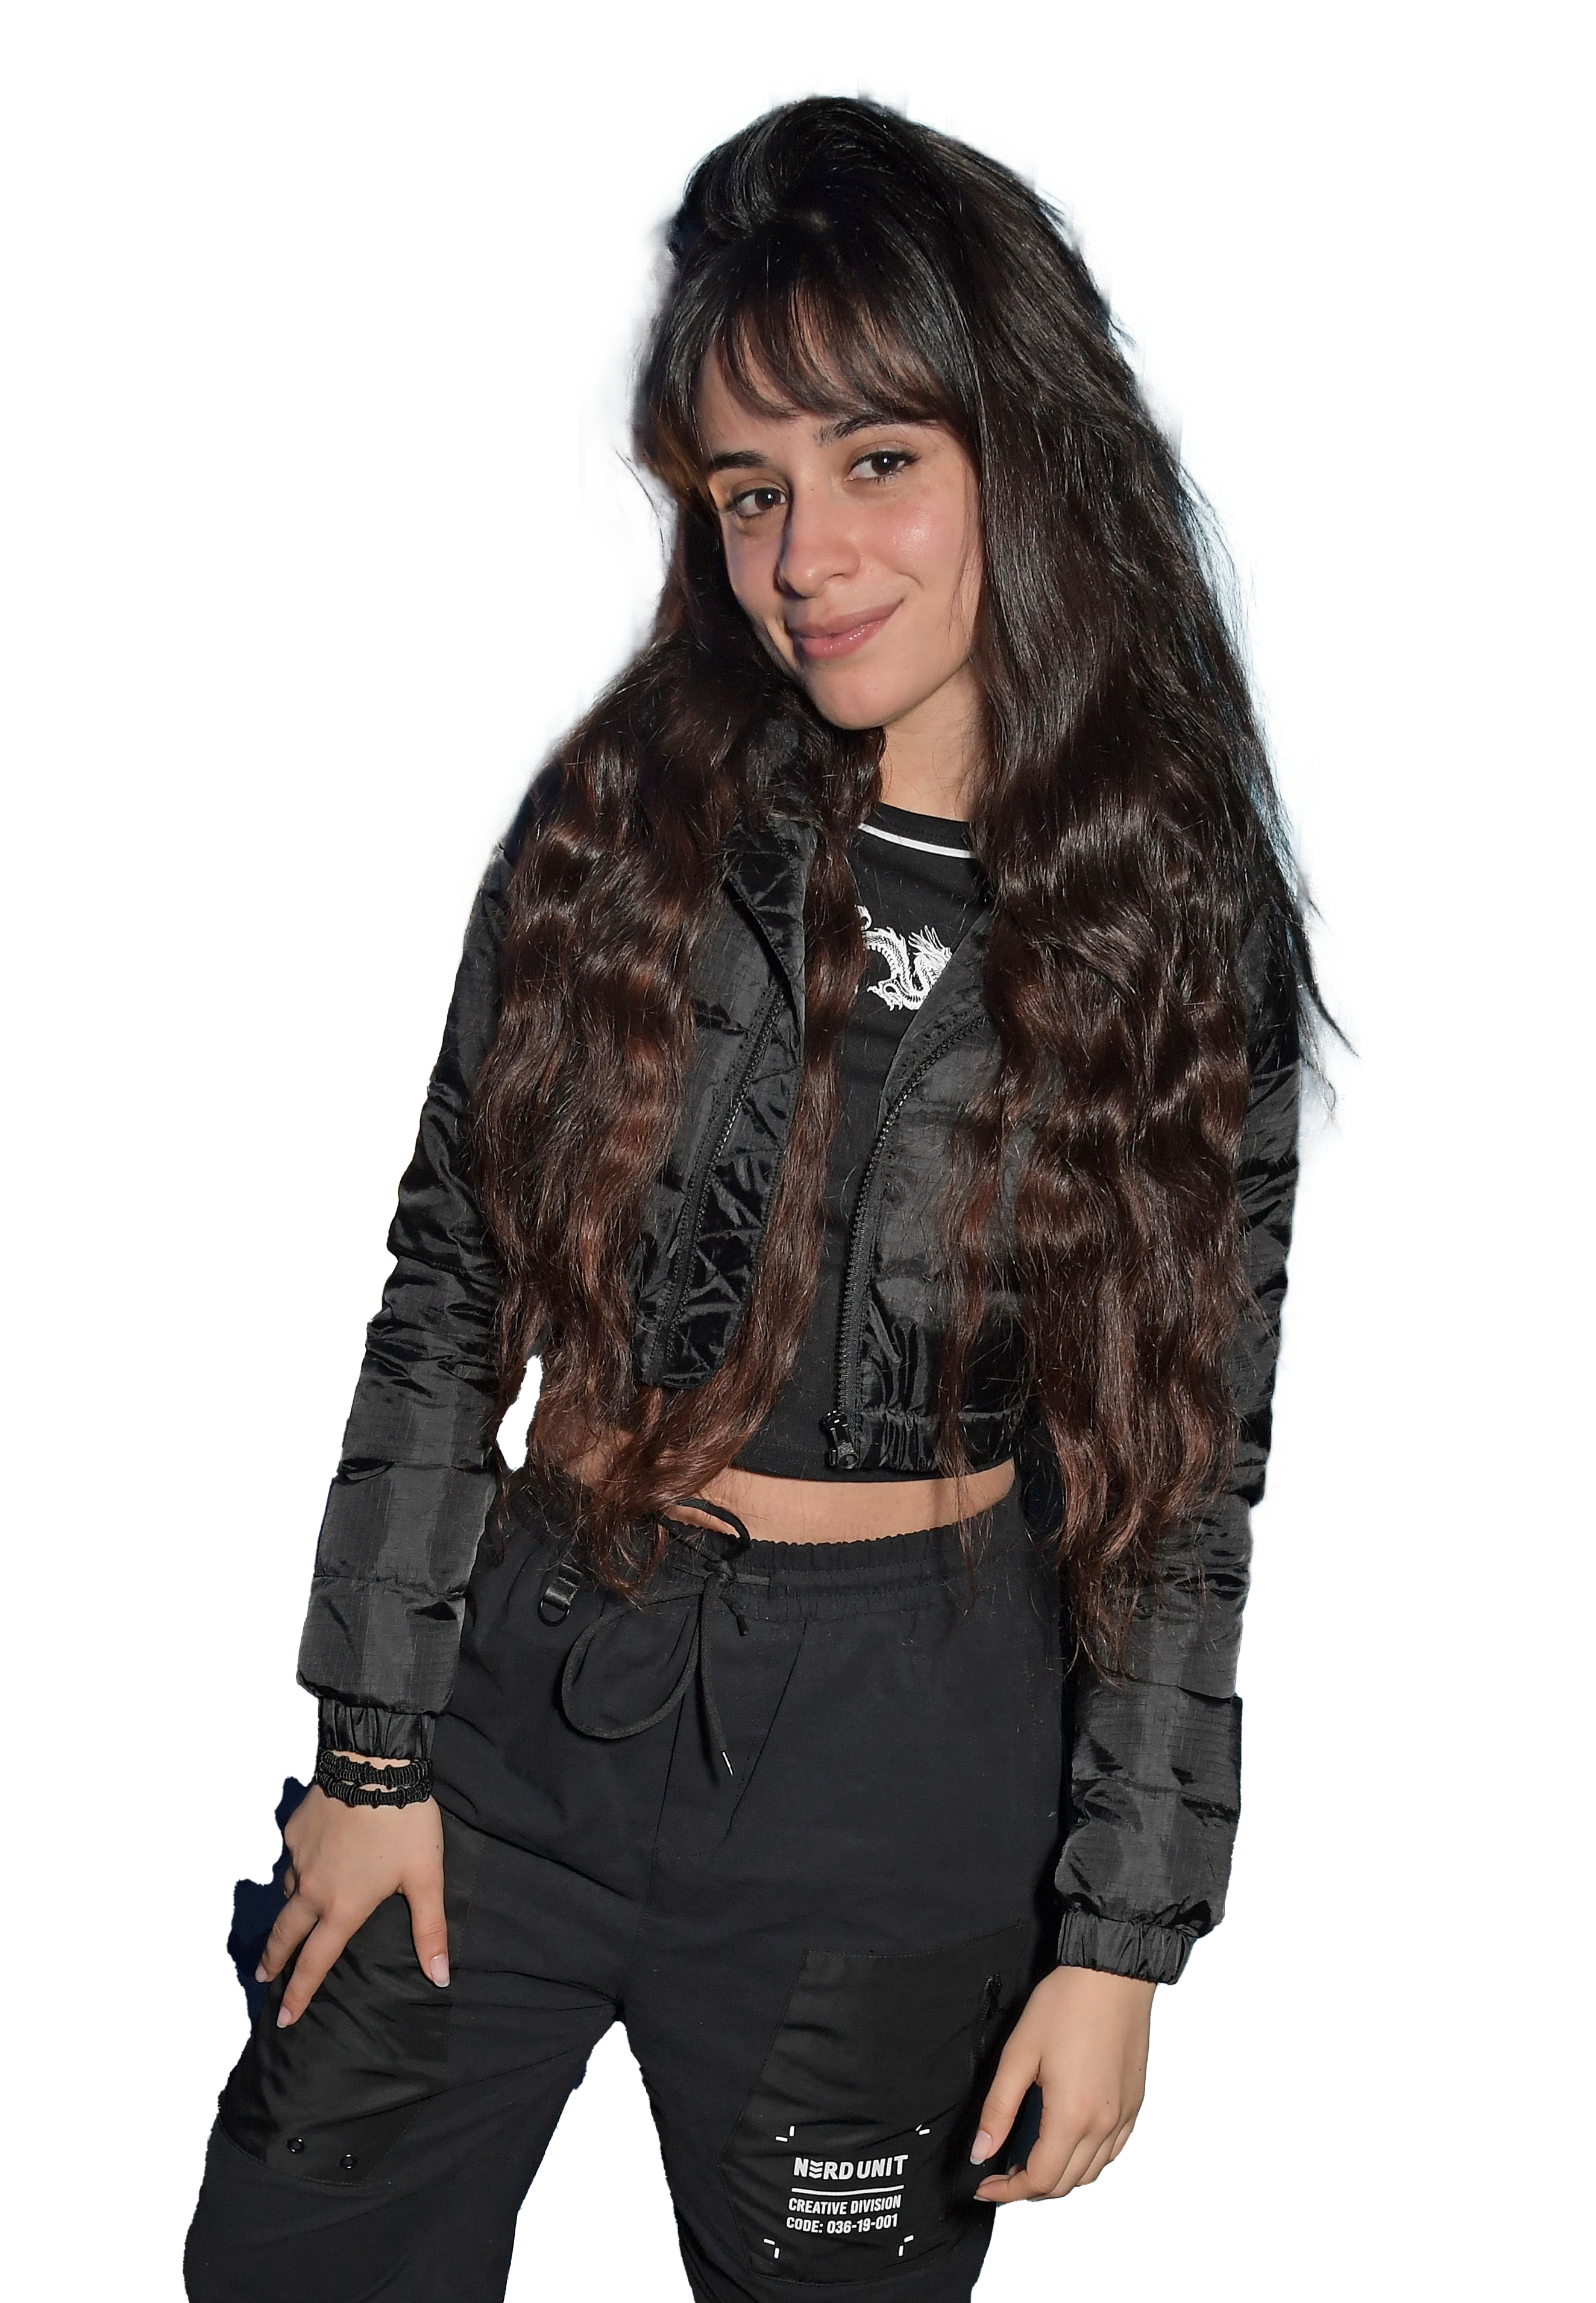 Singer Camila Cabello PNG Images